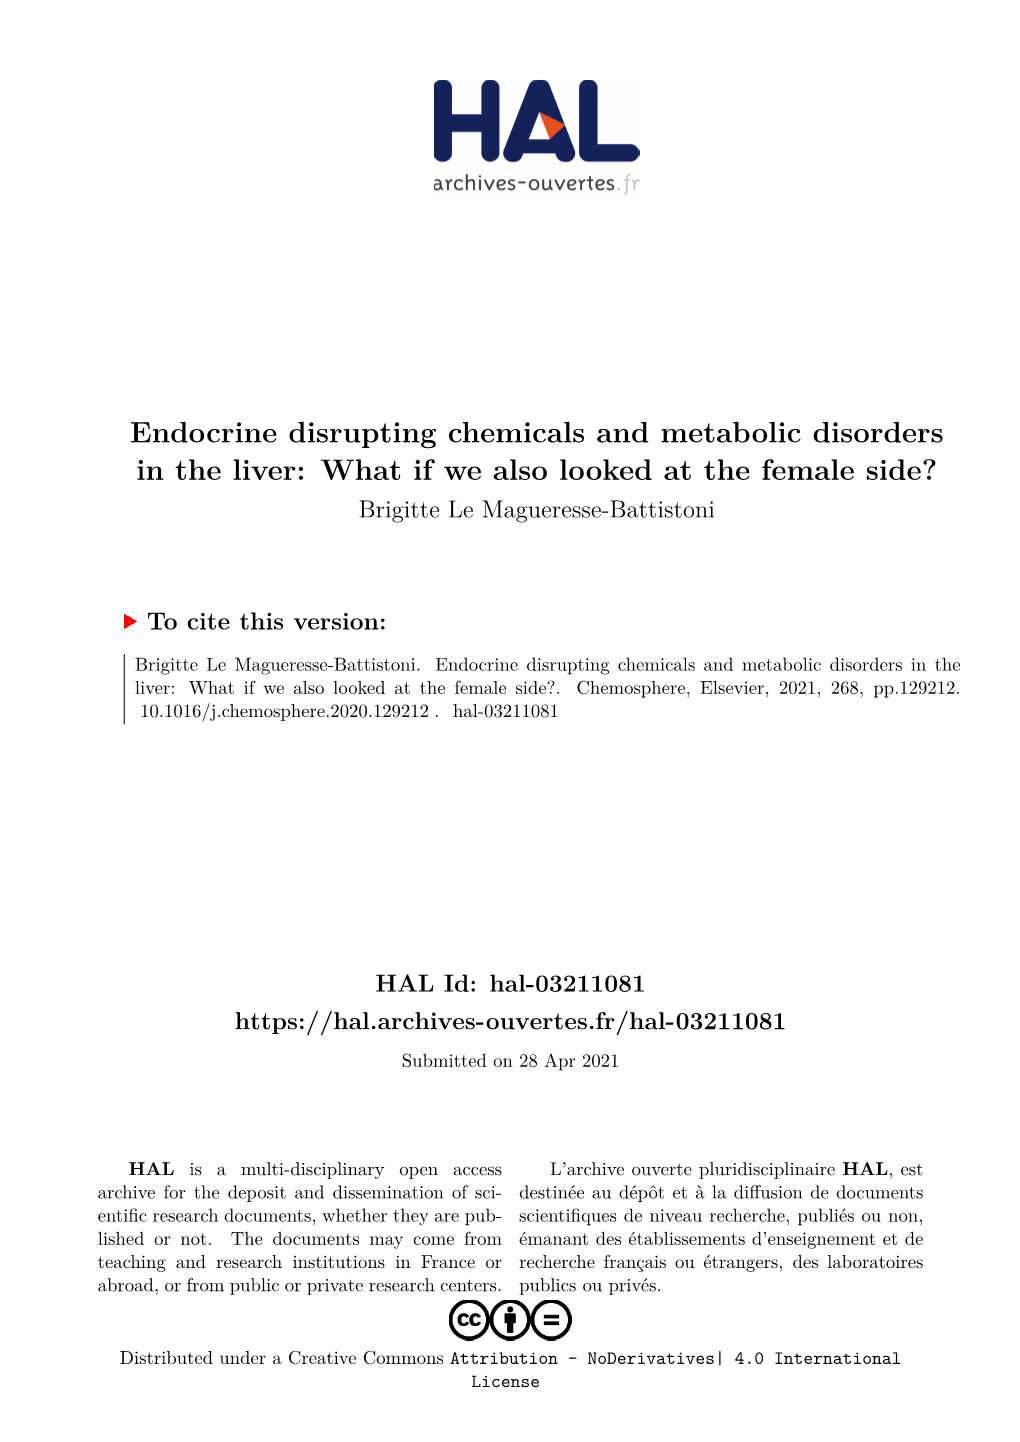 Endocrine Disrupting Chemicals and Metabolic Disorders in the Liver: What If We Also Looked at the Female Side? Brigitte Le Magueresse-Battistoni